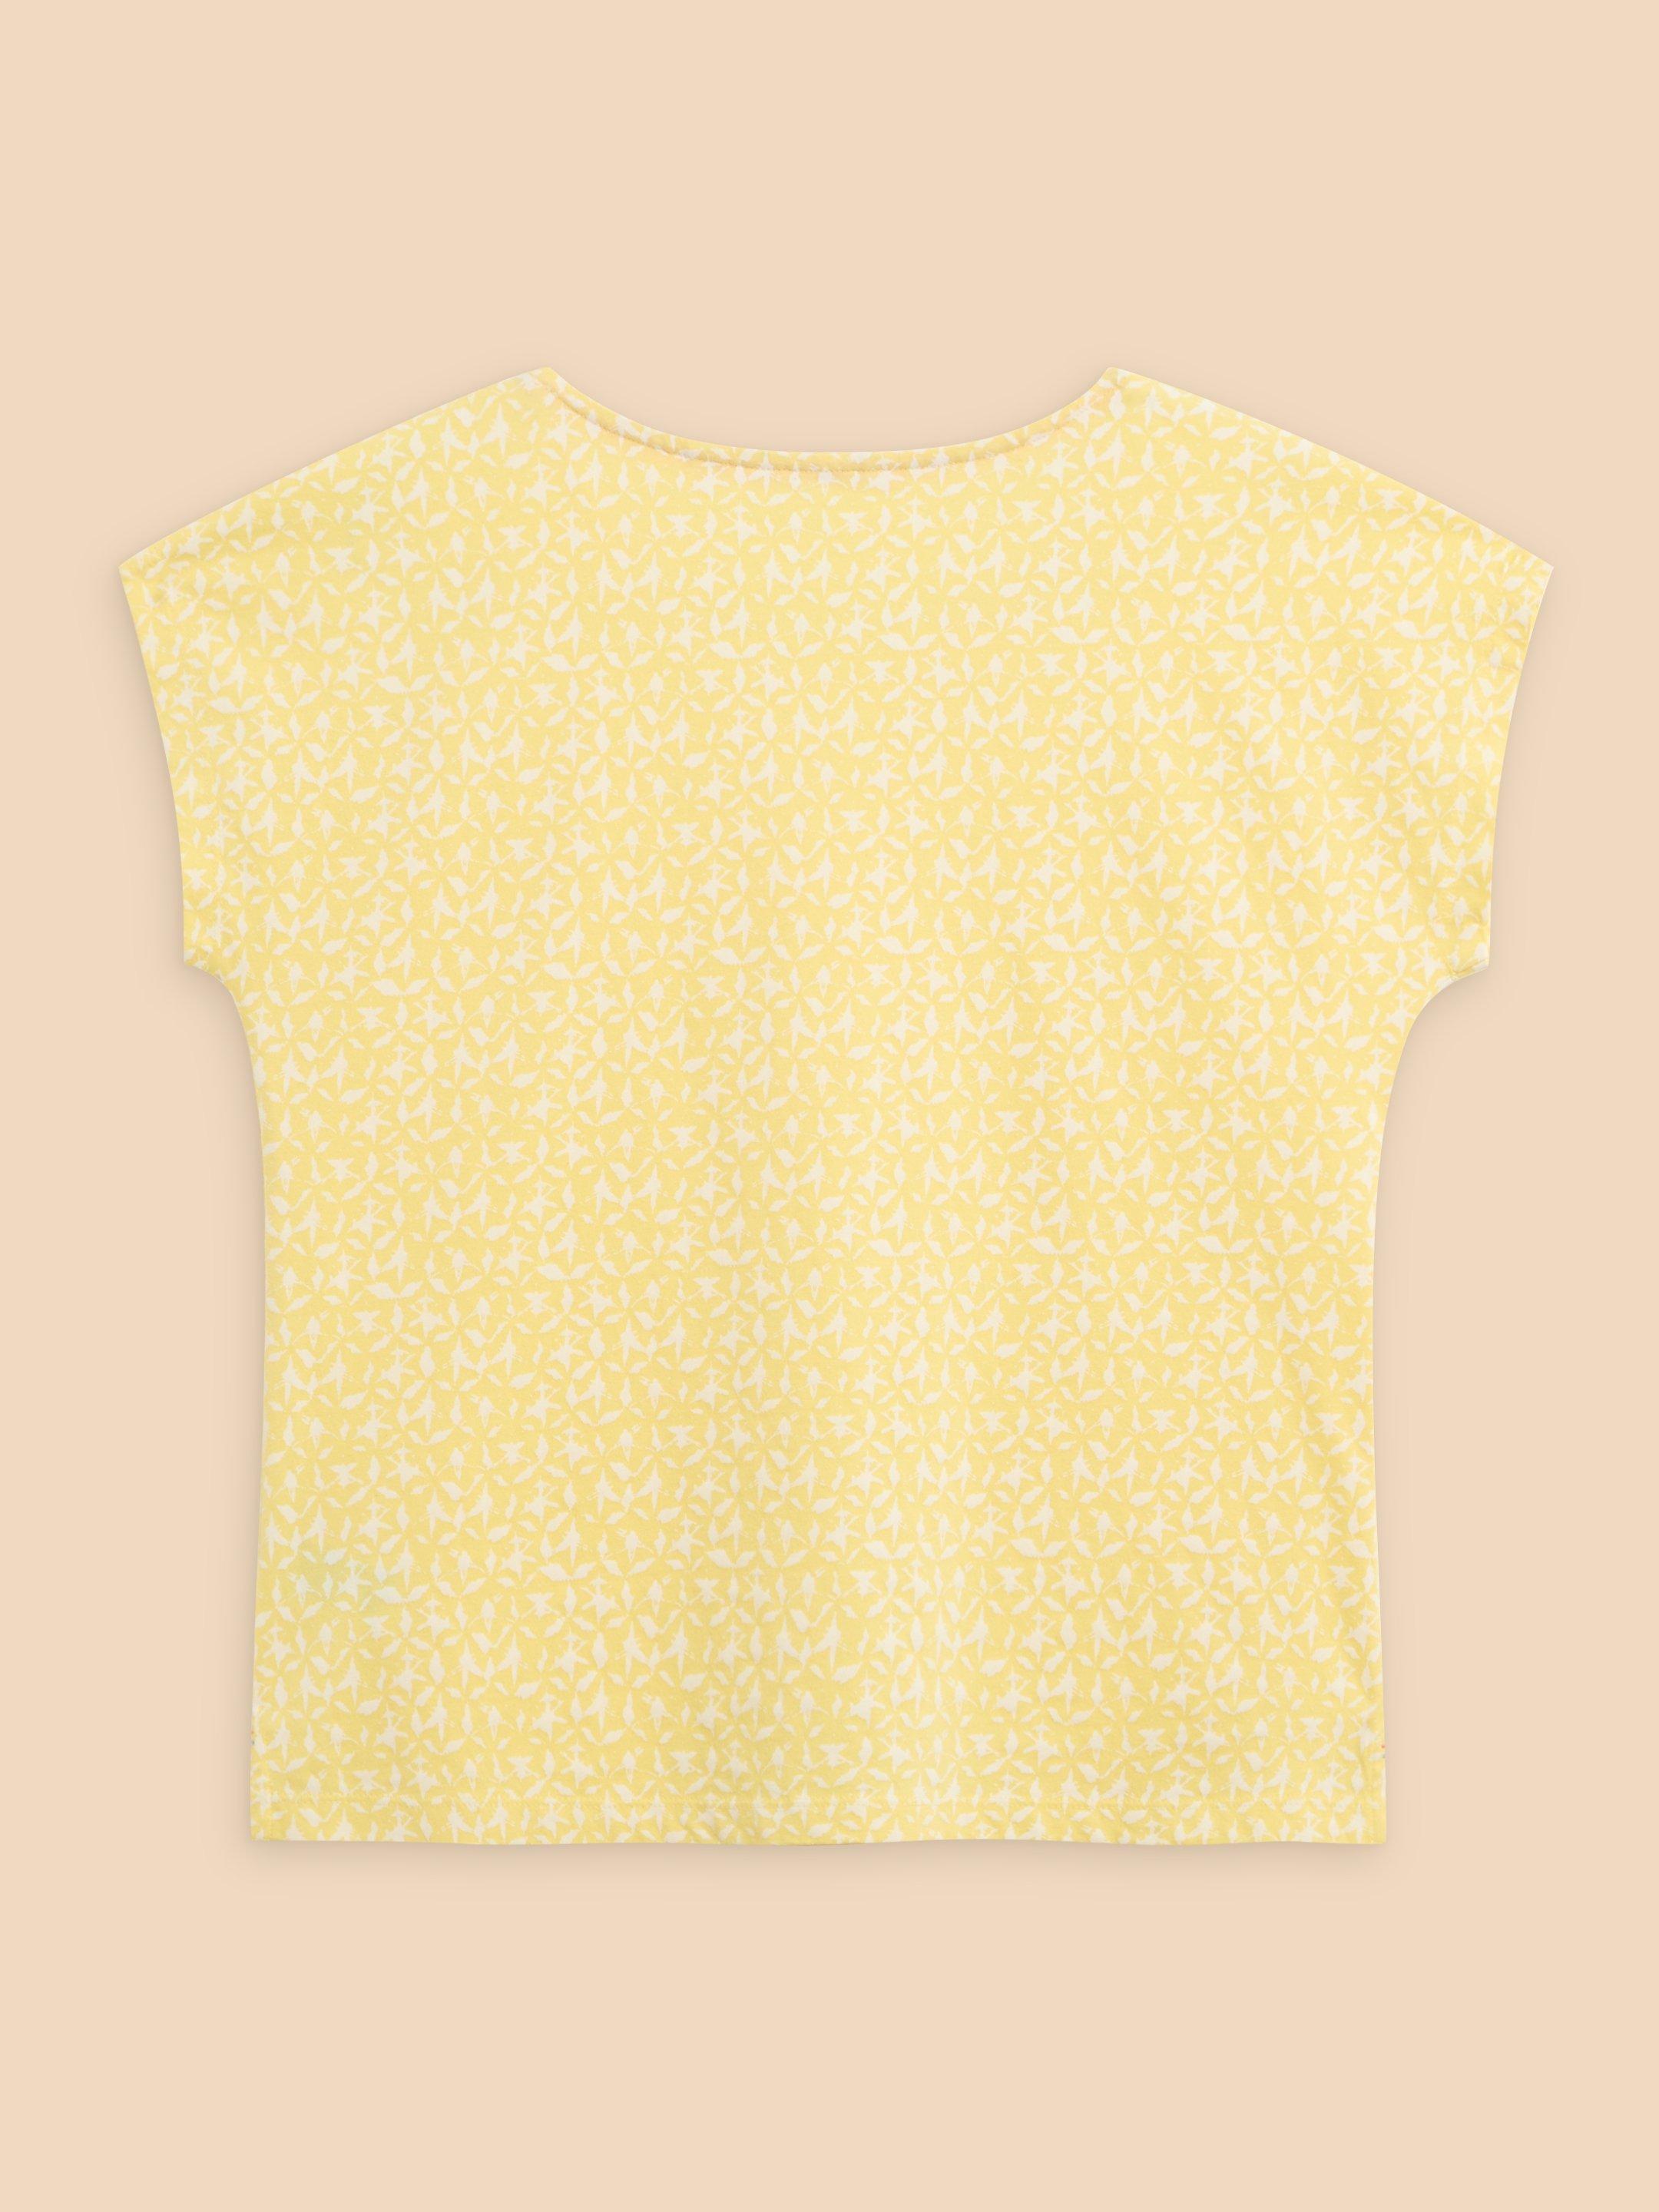 ANTHEA EMBROIDERY SHORT SLEEVE TOP in YELLOW PR - FLAT BACK